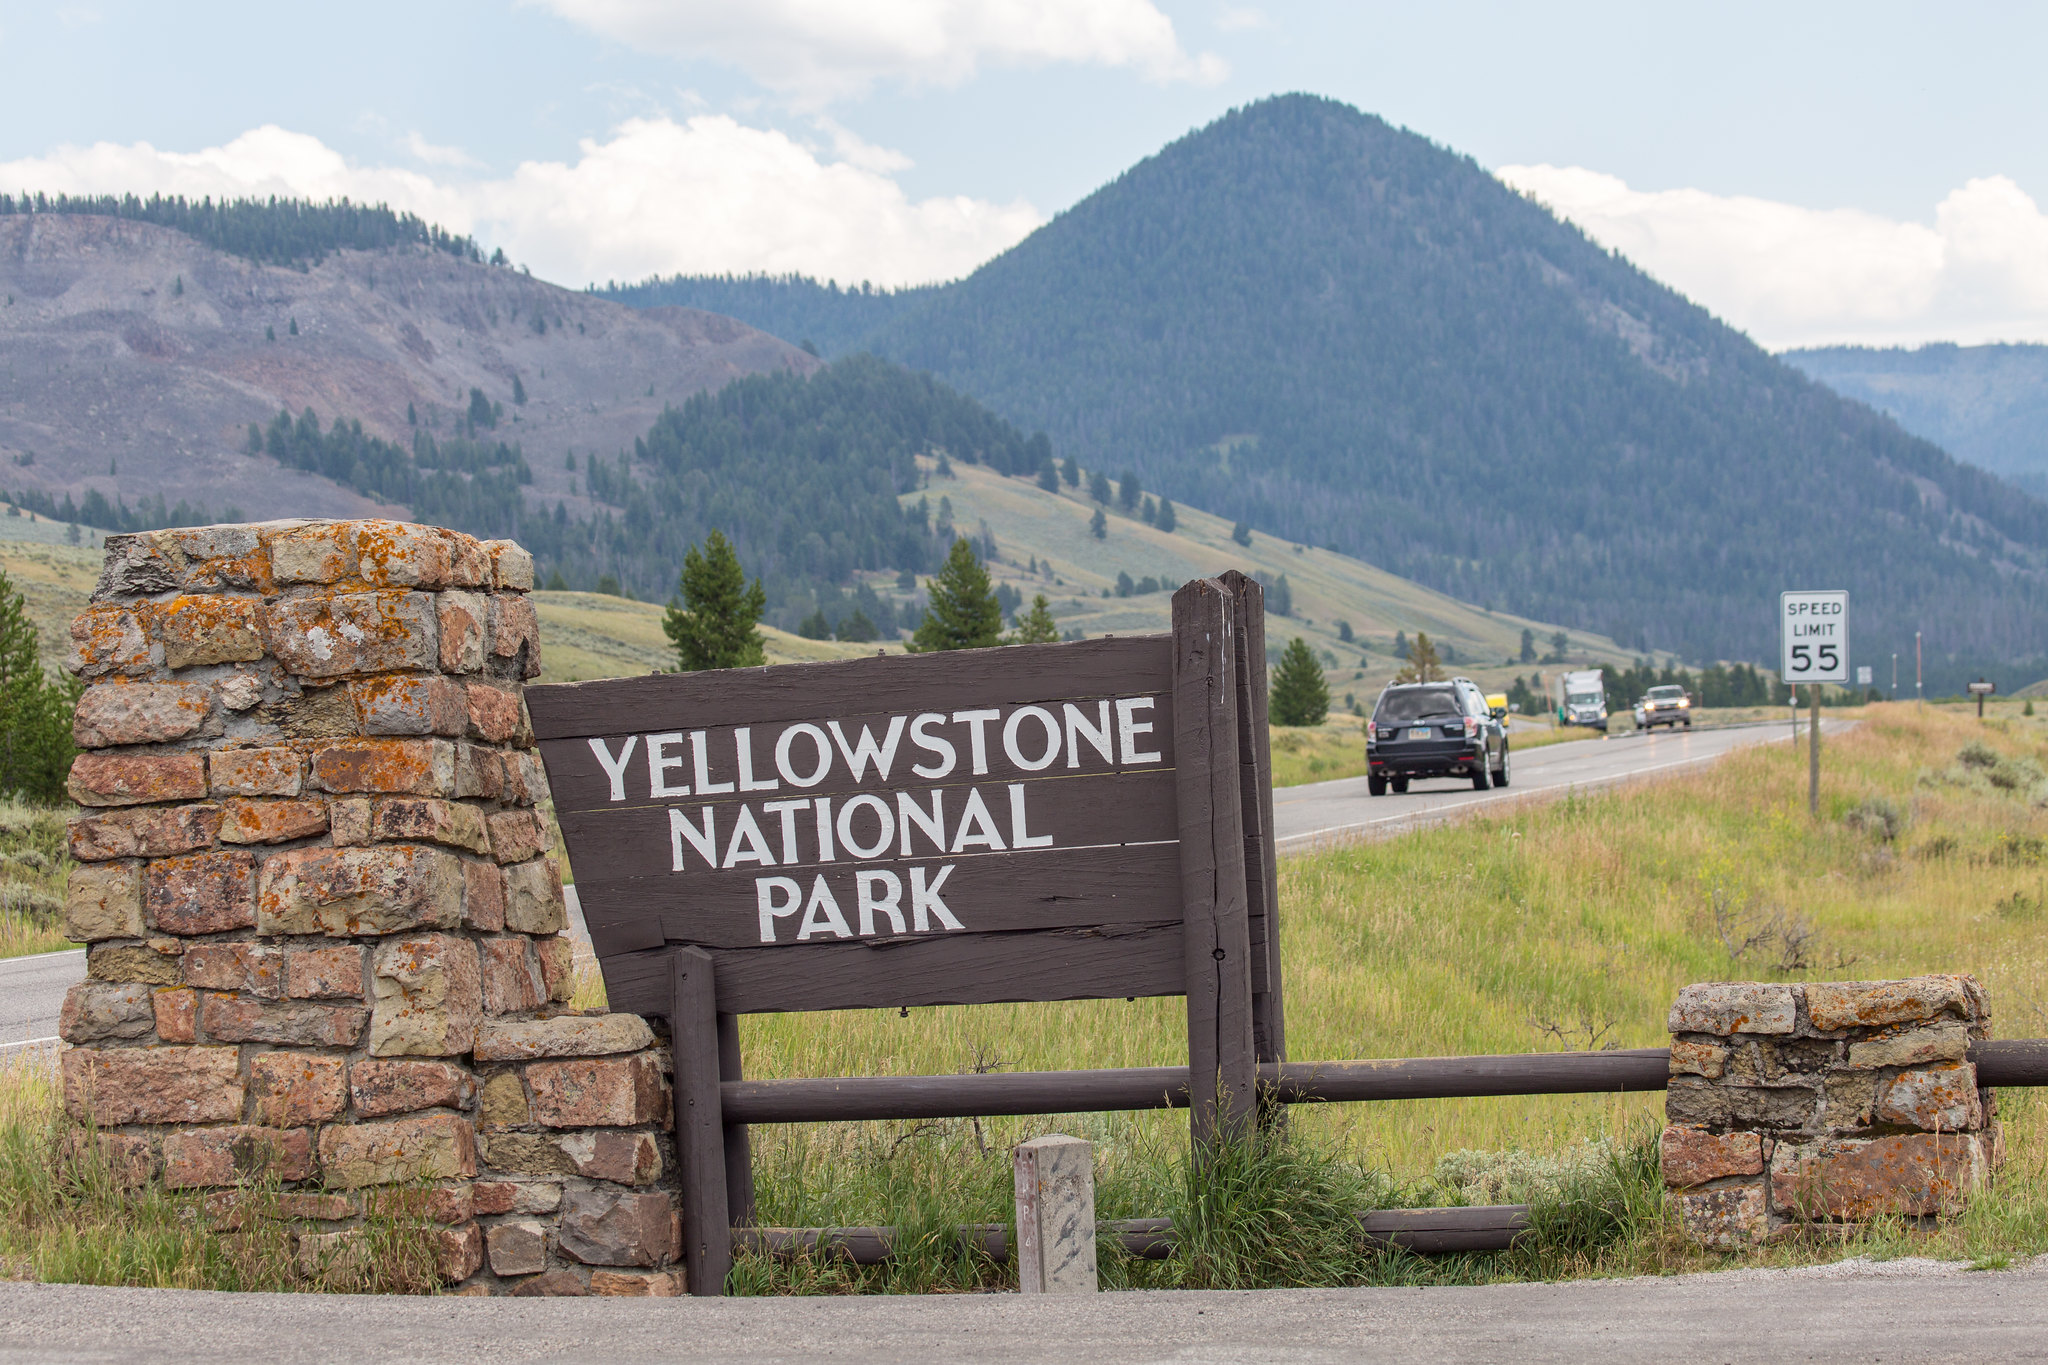 Yellowstone Entrance on Highway 191